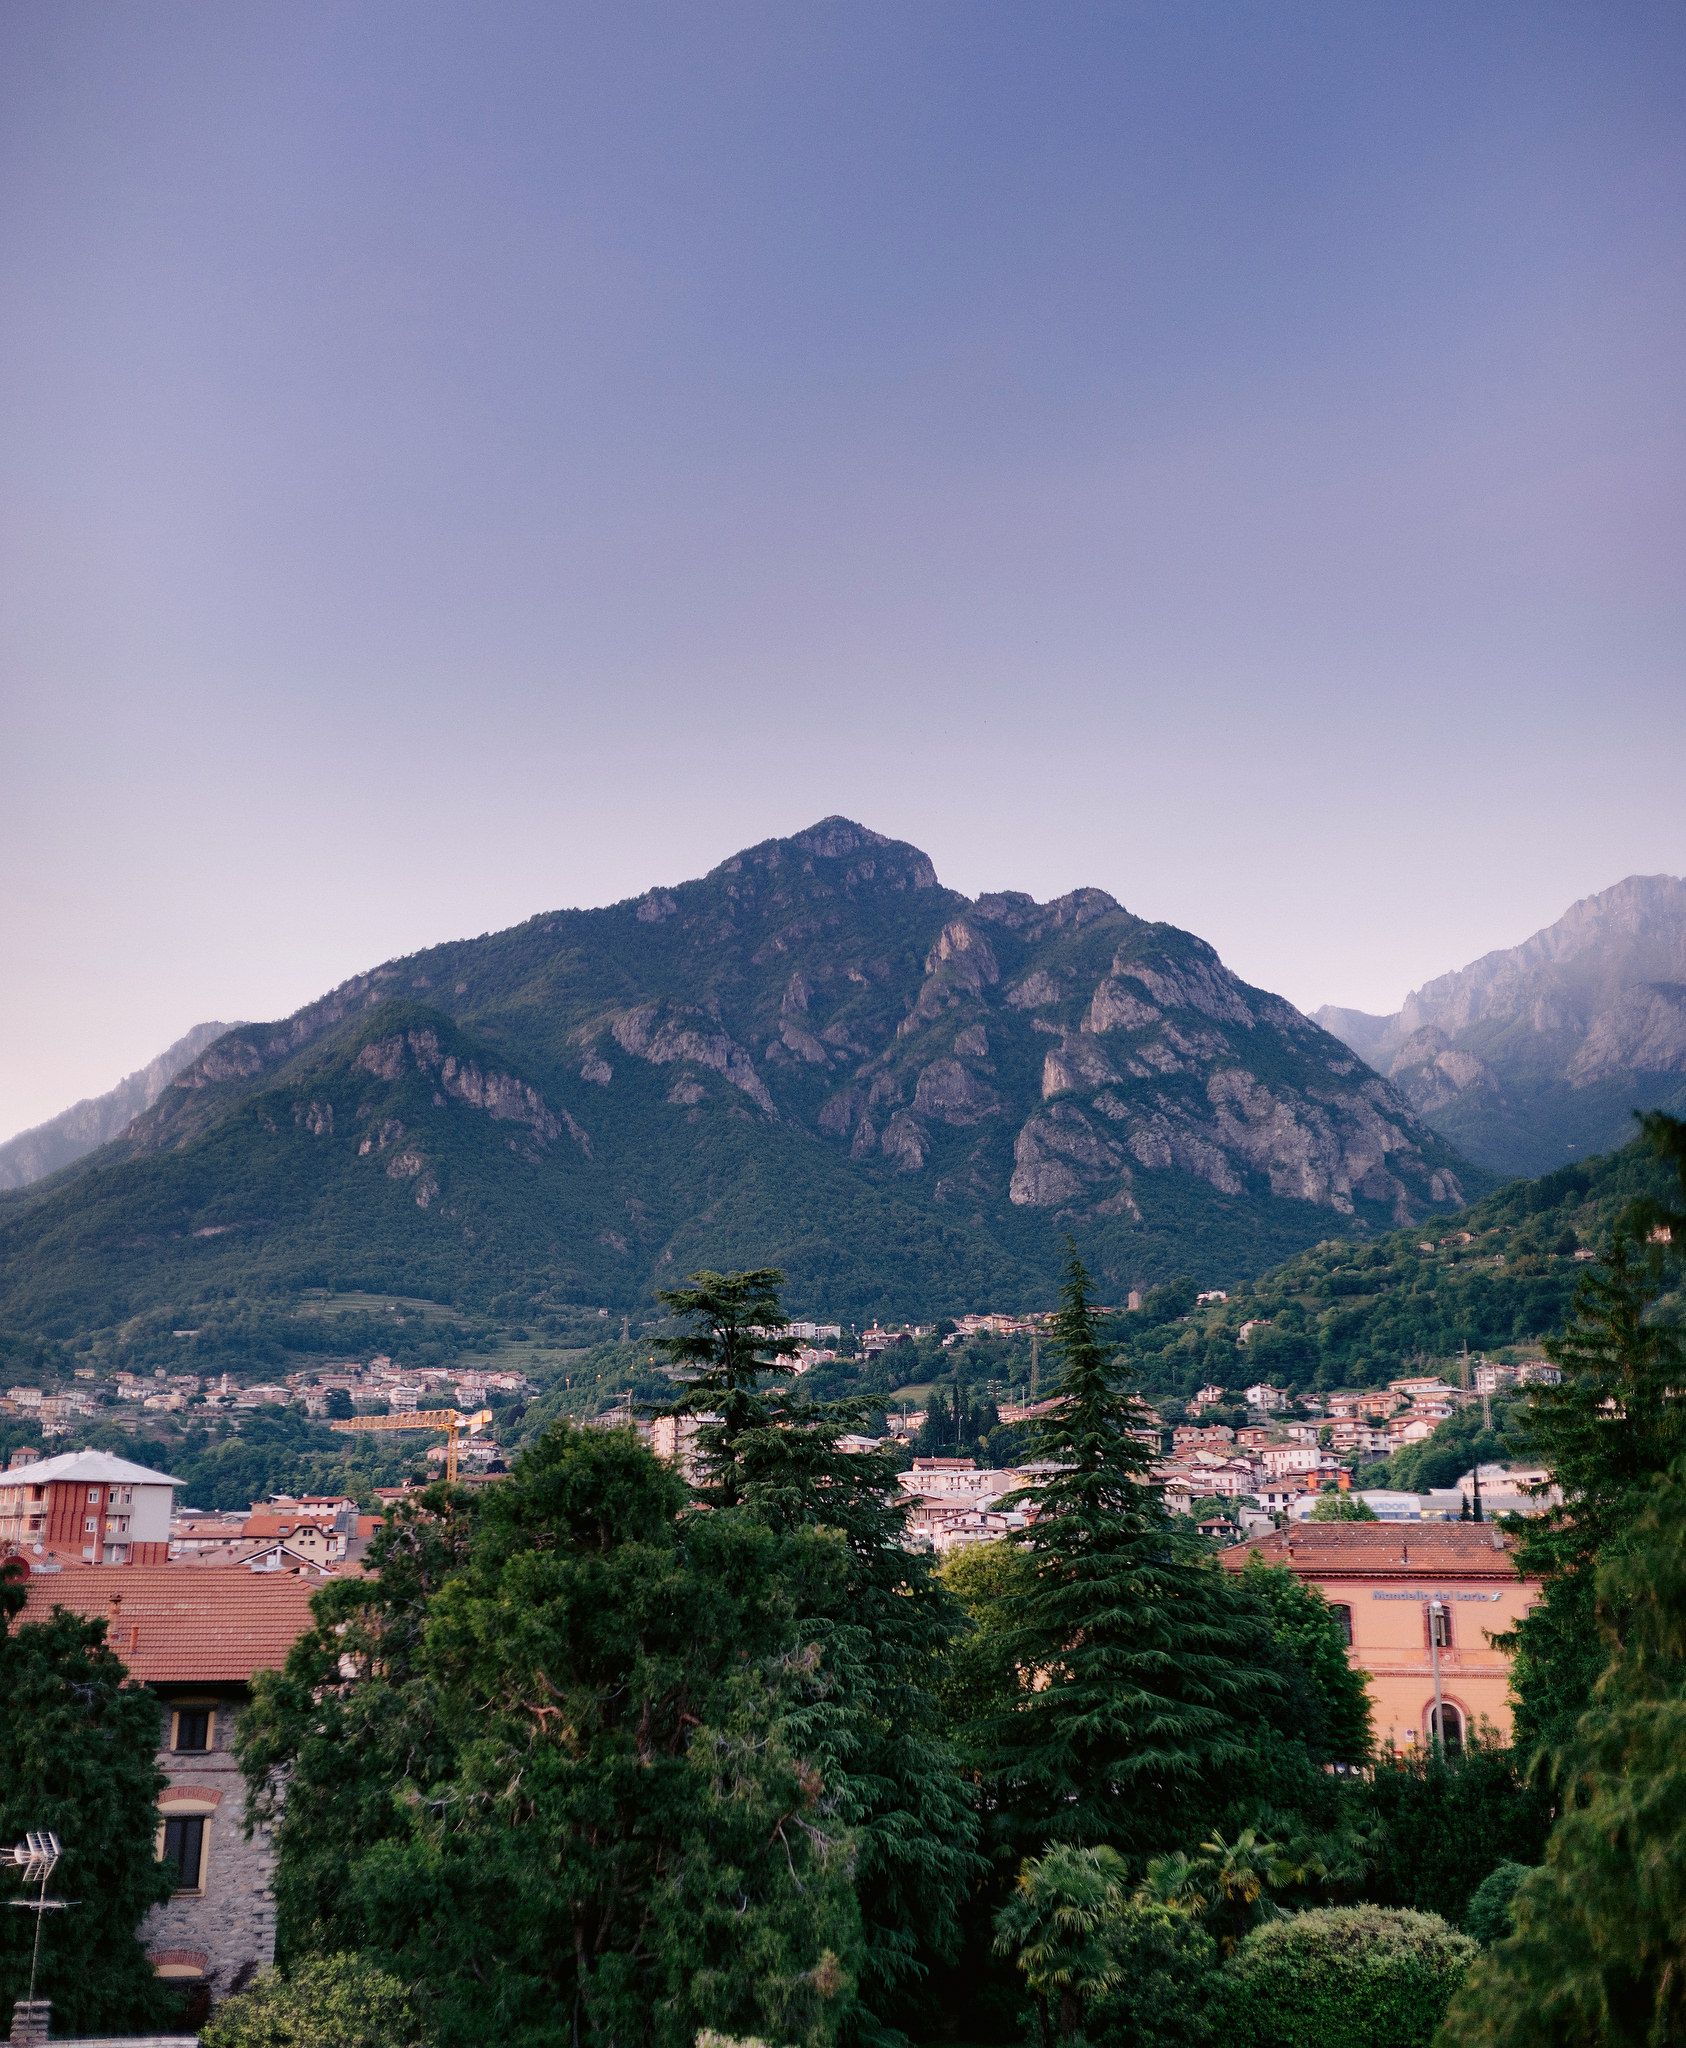 View of the mountains and towns at Lake Como. Wedding in Italy image by Jenny Fu Studio